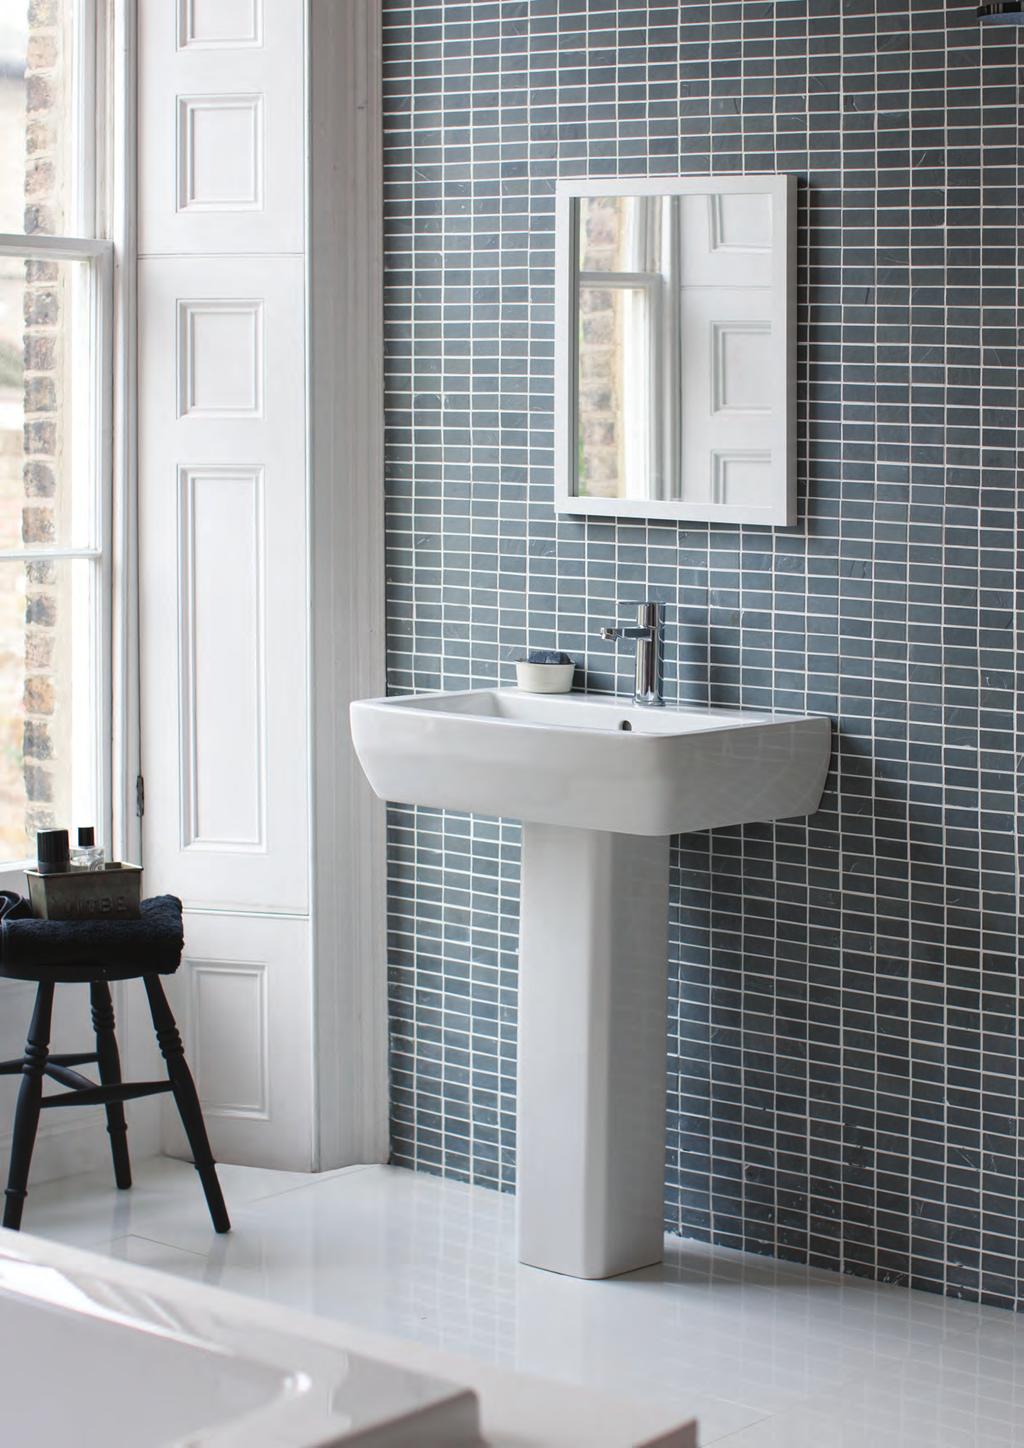 CERAMICS CERAMICS This back-to-wall range provides a clean attractive look to your contemporary bathroom.